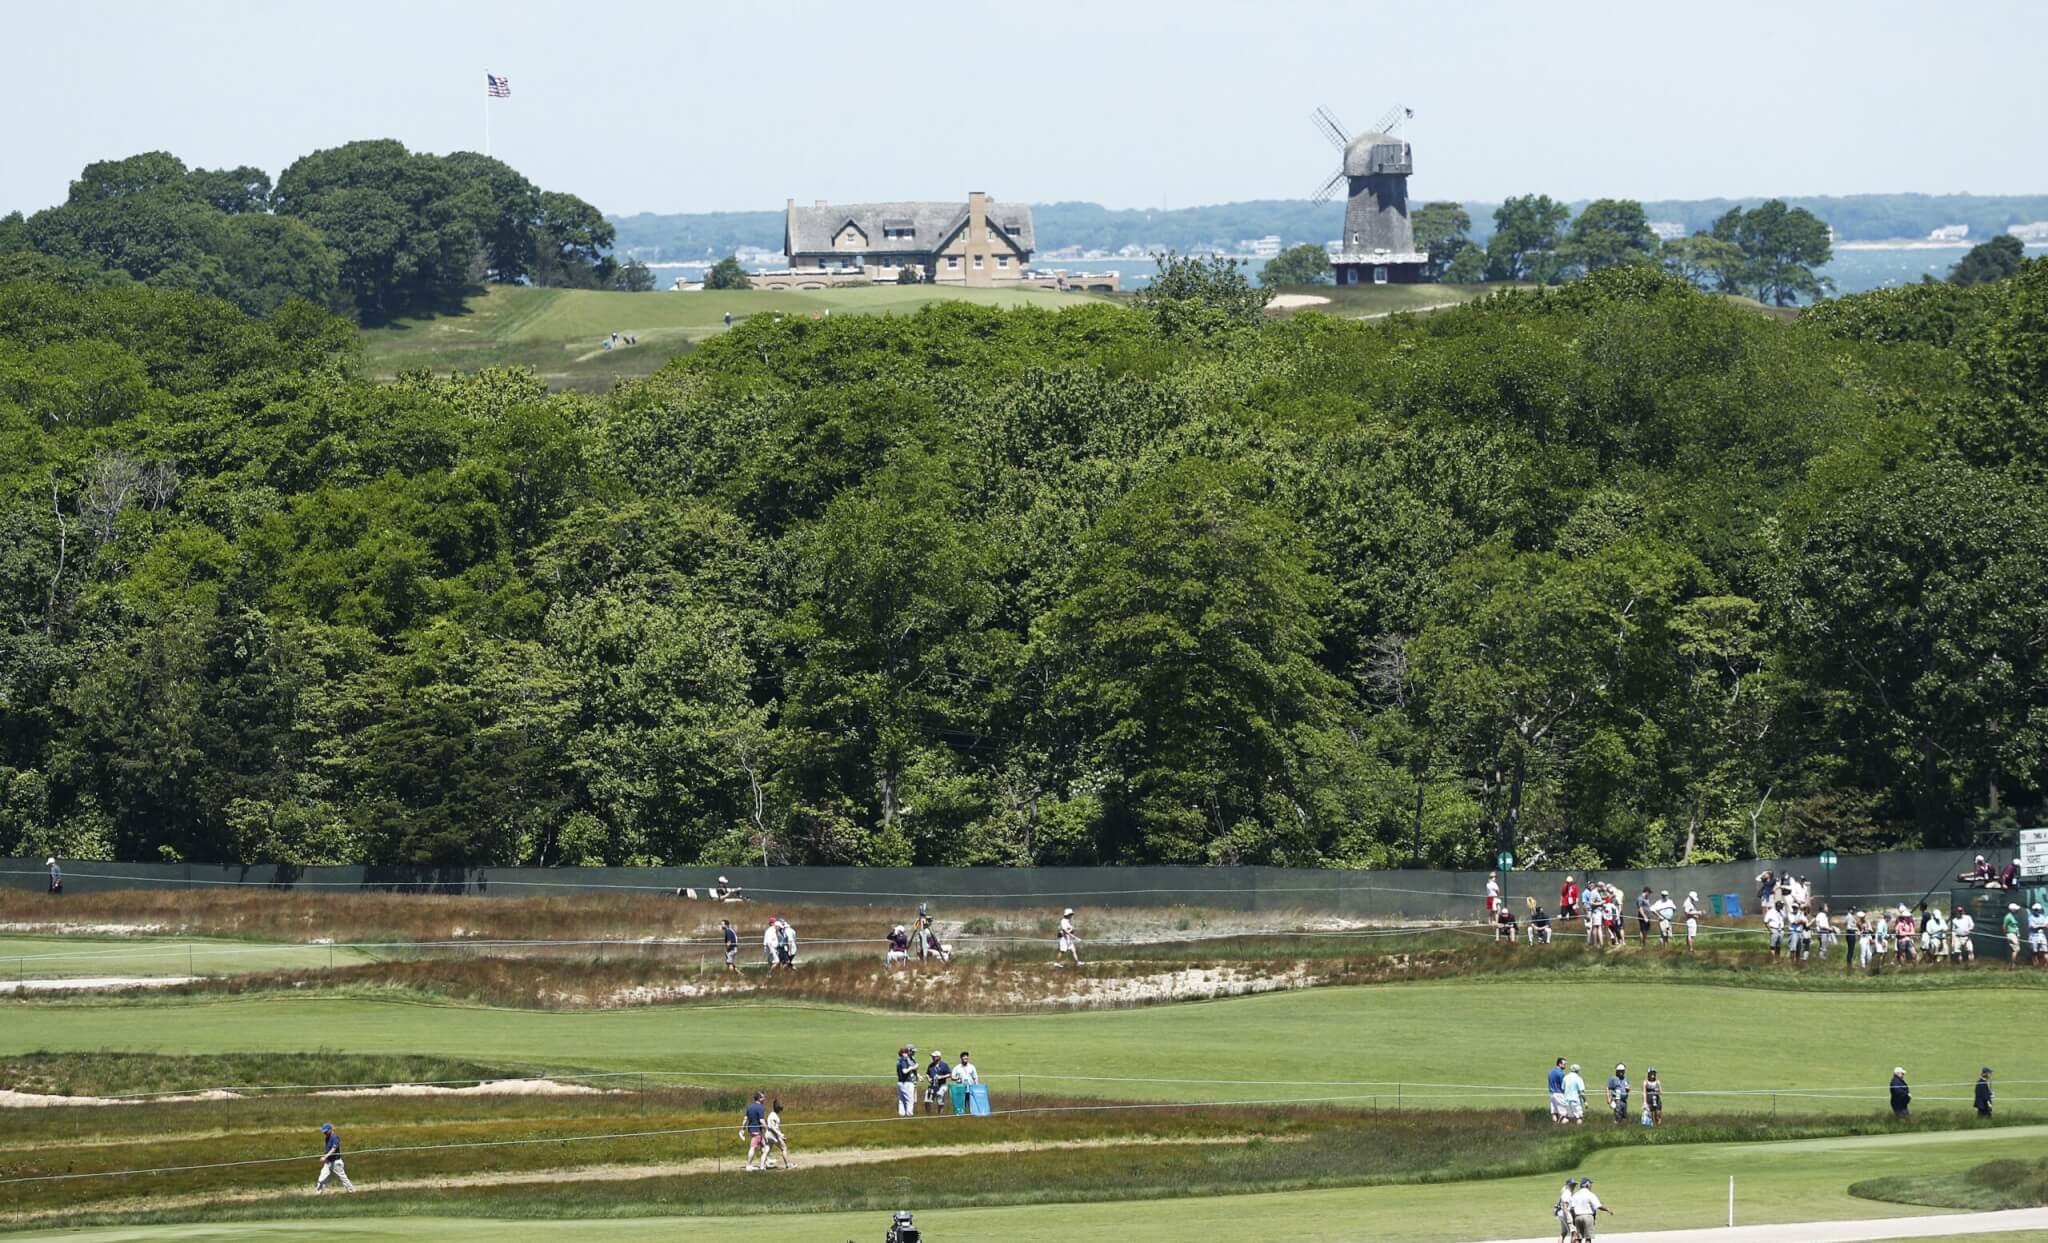 Overall of the course during the first round of the 118th US Open Championship at Shinnecock Hills Golf Club in Southampton, New York, USA, 14 June 2018. The tournament will be played 14 June thorough 17 June.